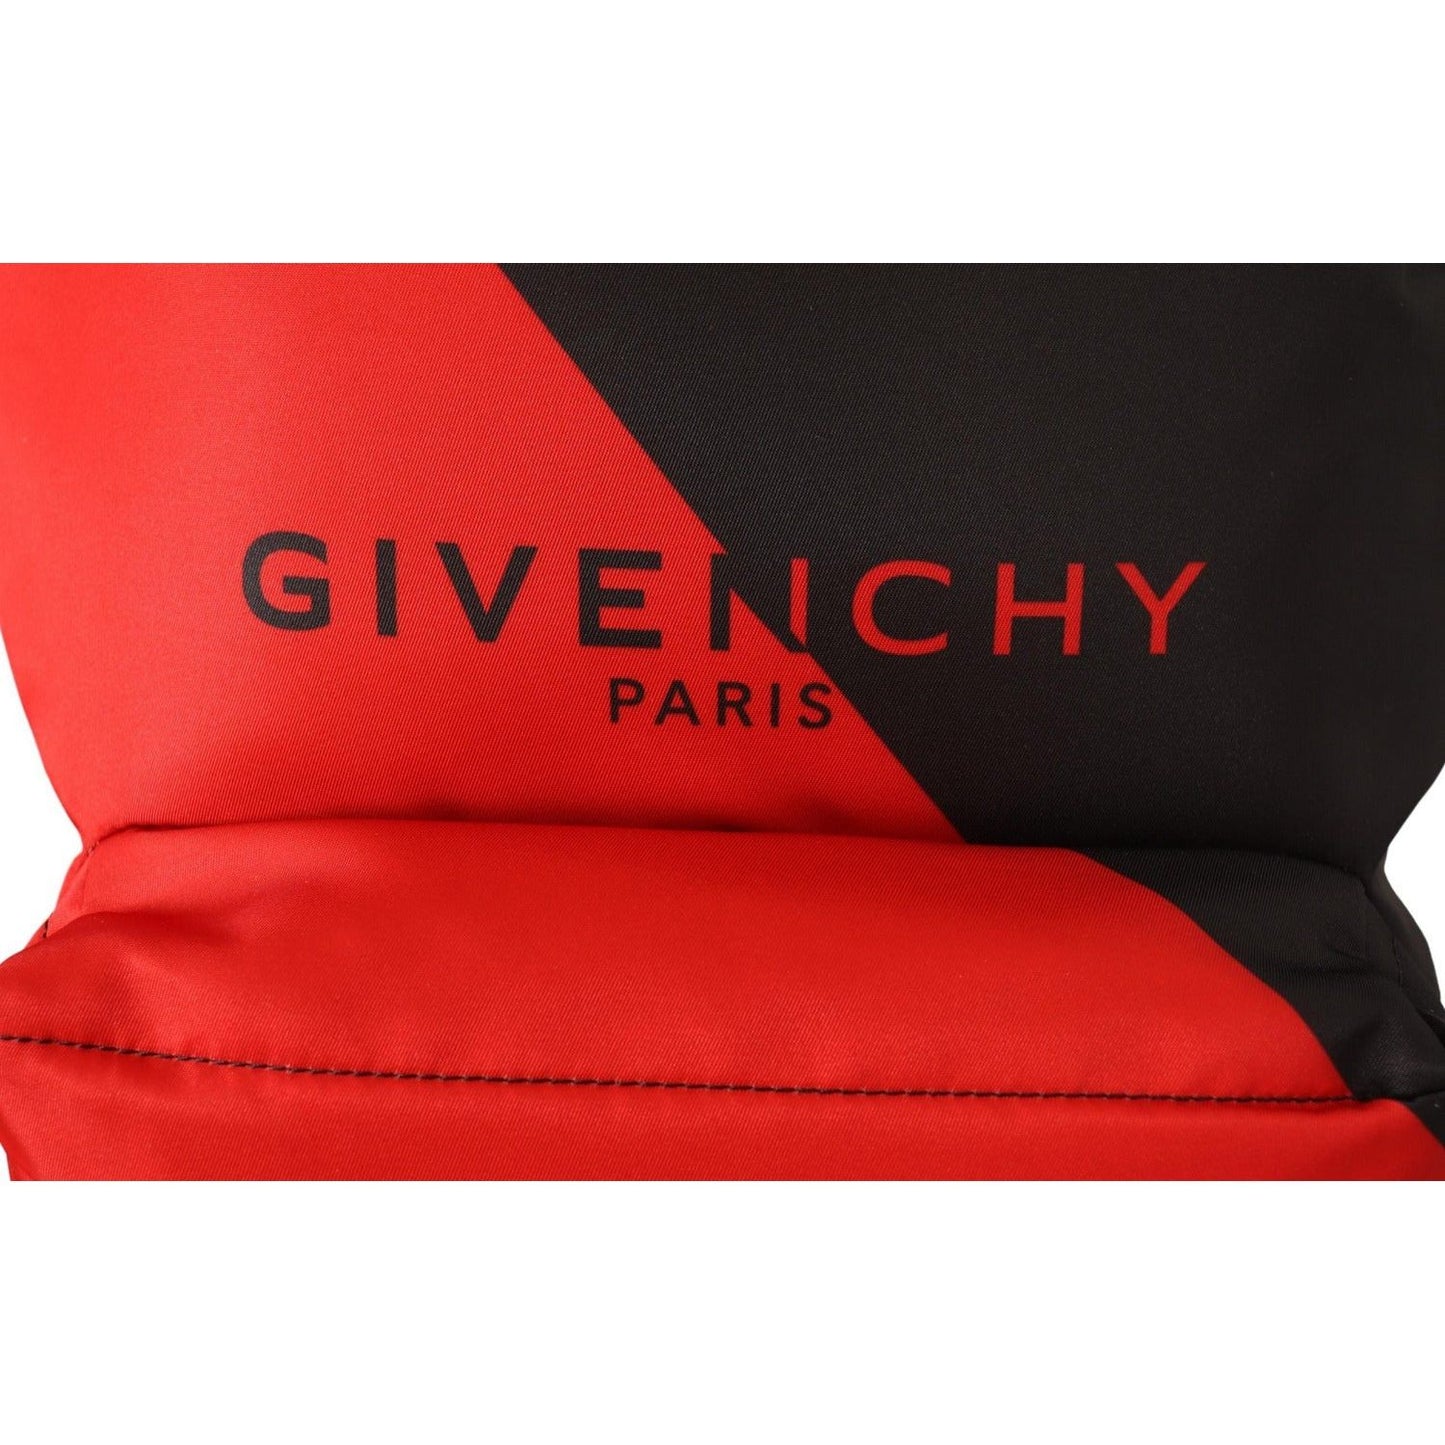 Givenchy Sleek Urban Backpack in Black and Red red-black-nylon-urban-backpack